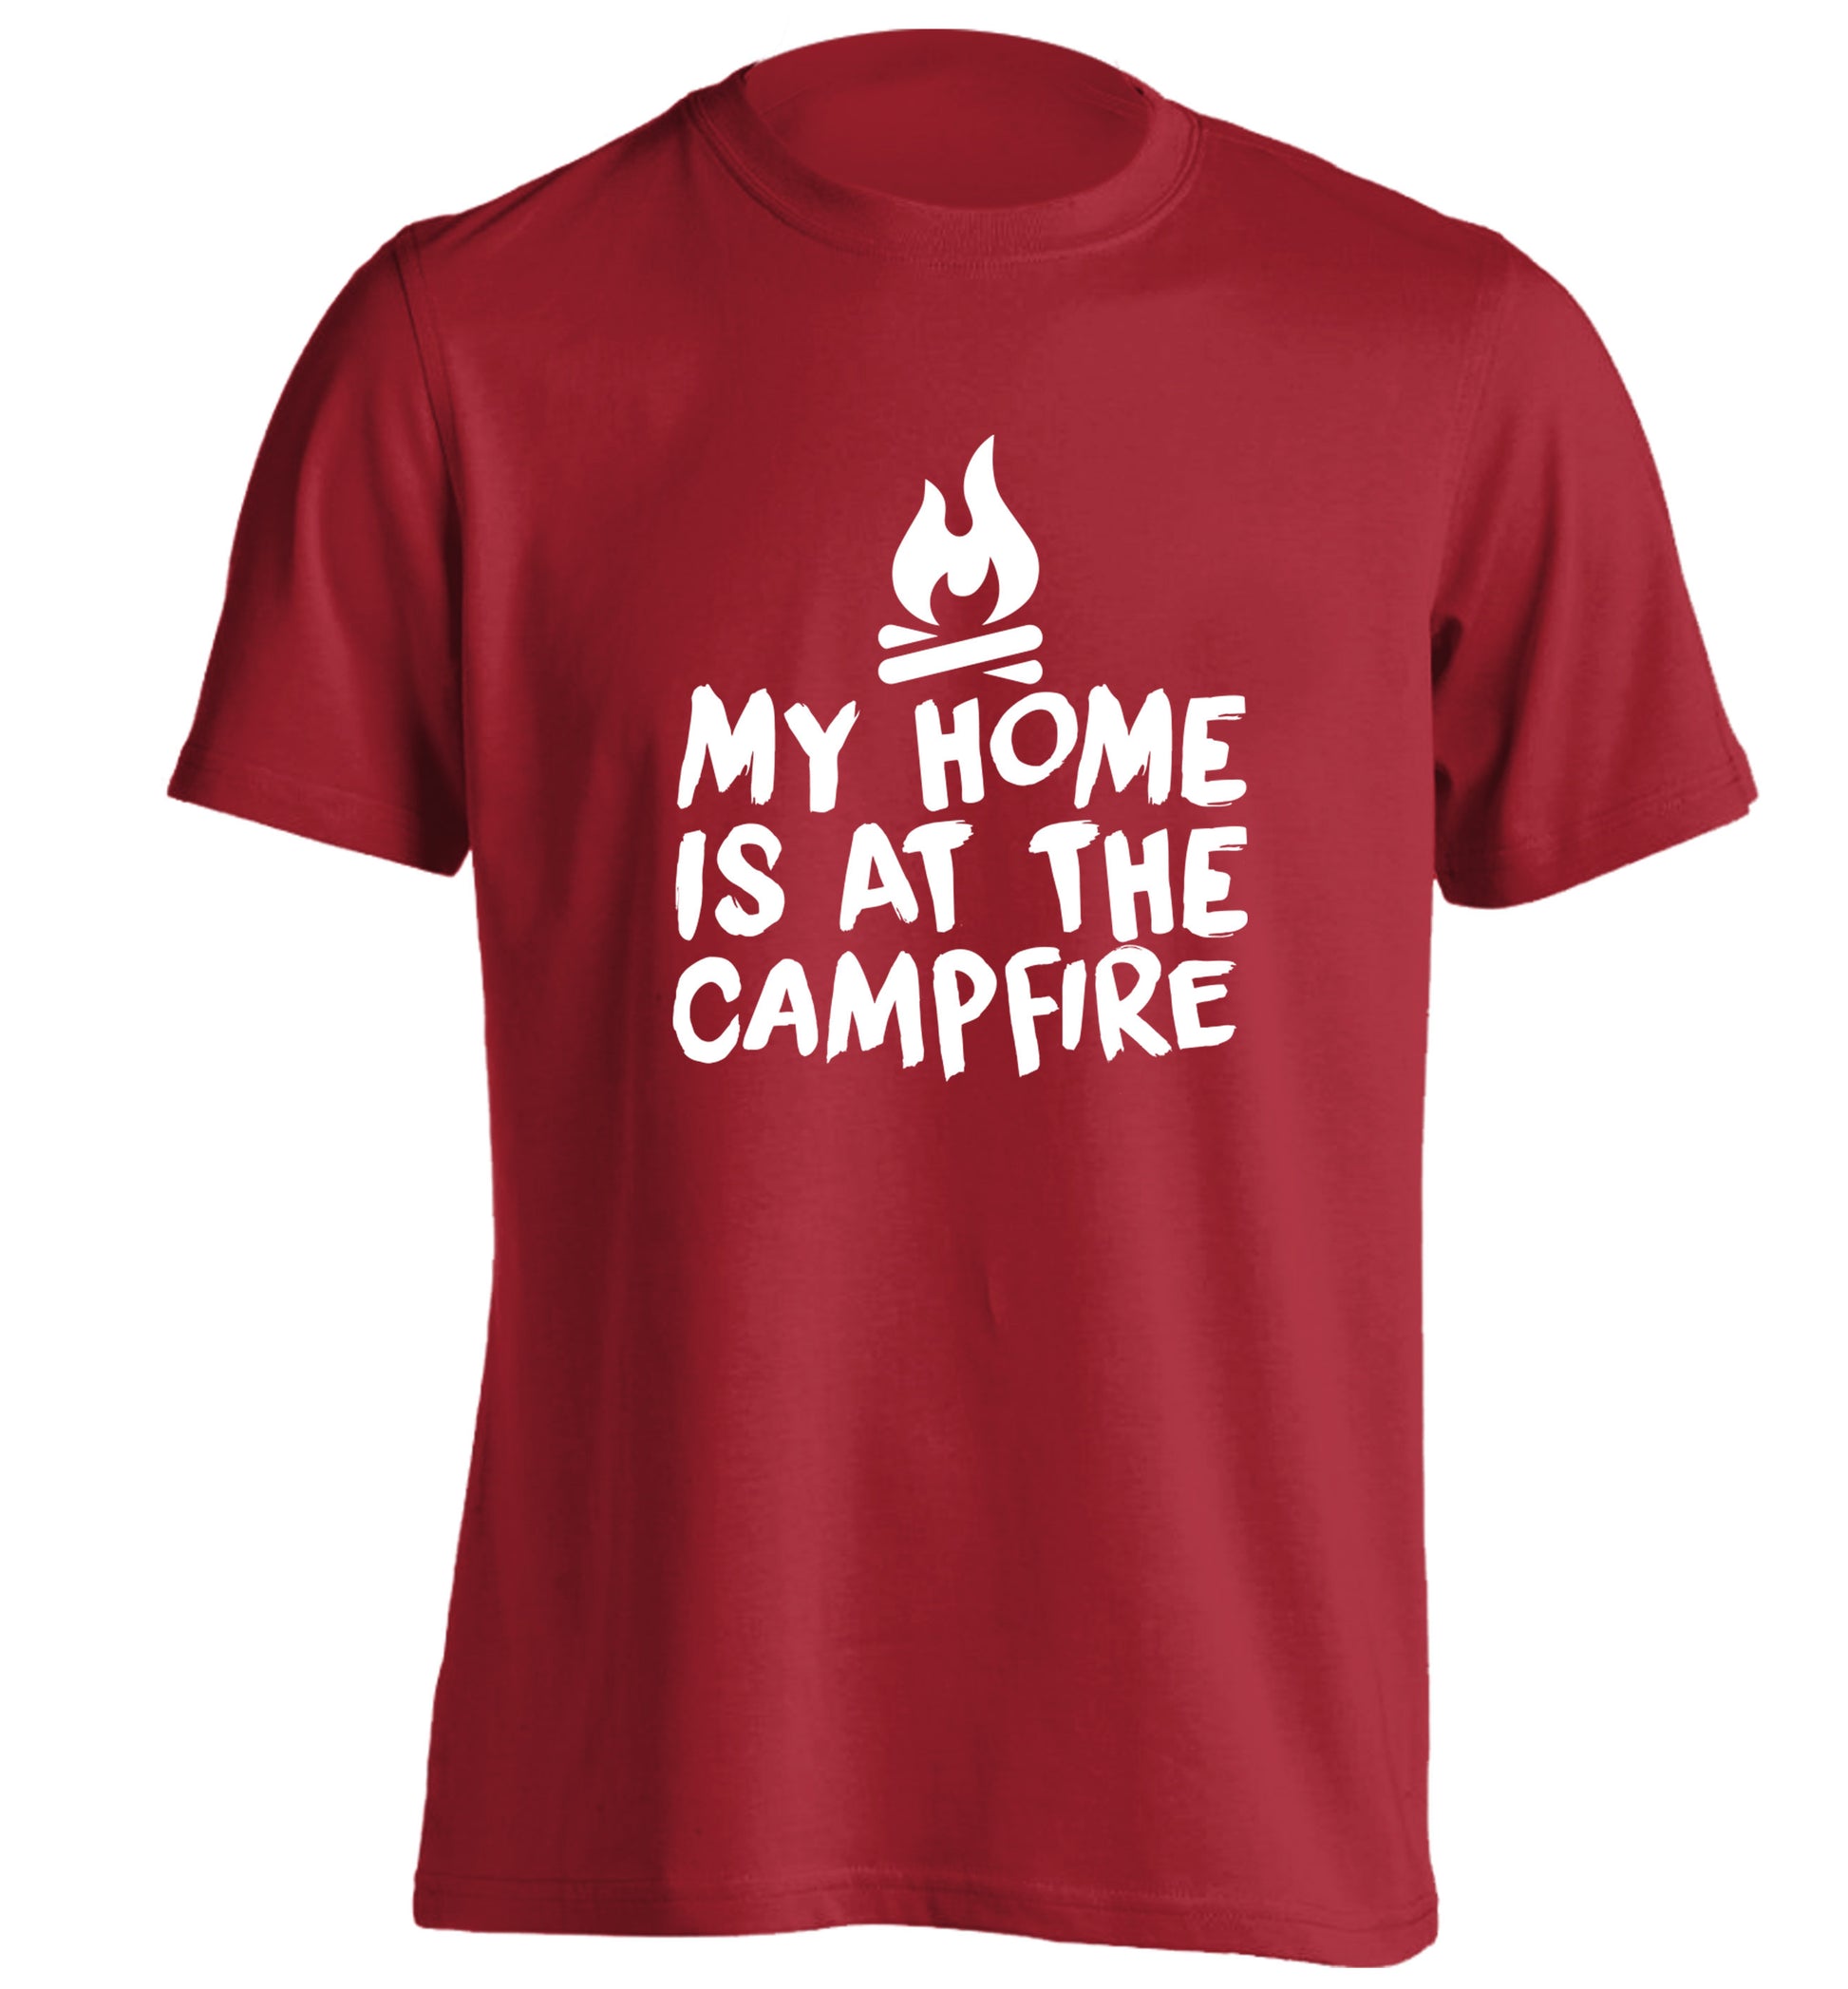 My home is at the campfire adults unisex red Tshirt 2XL